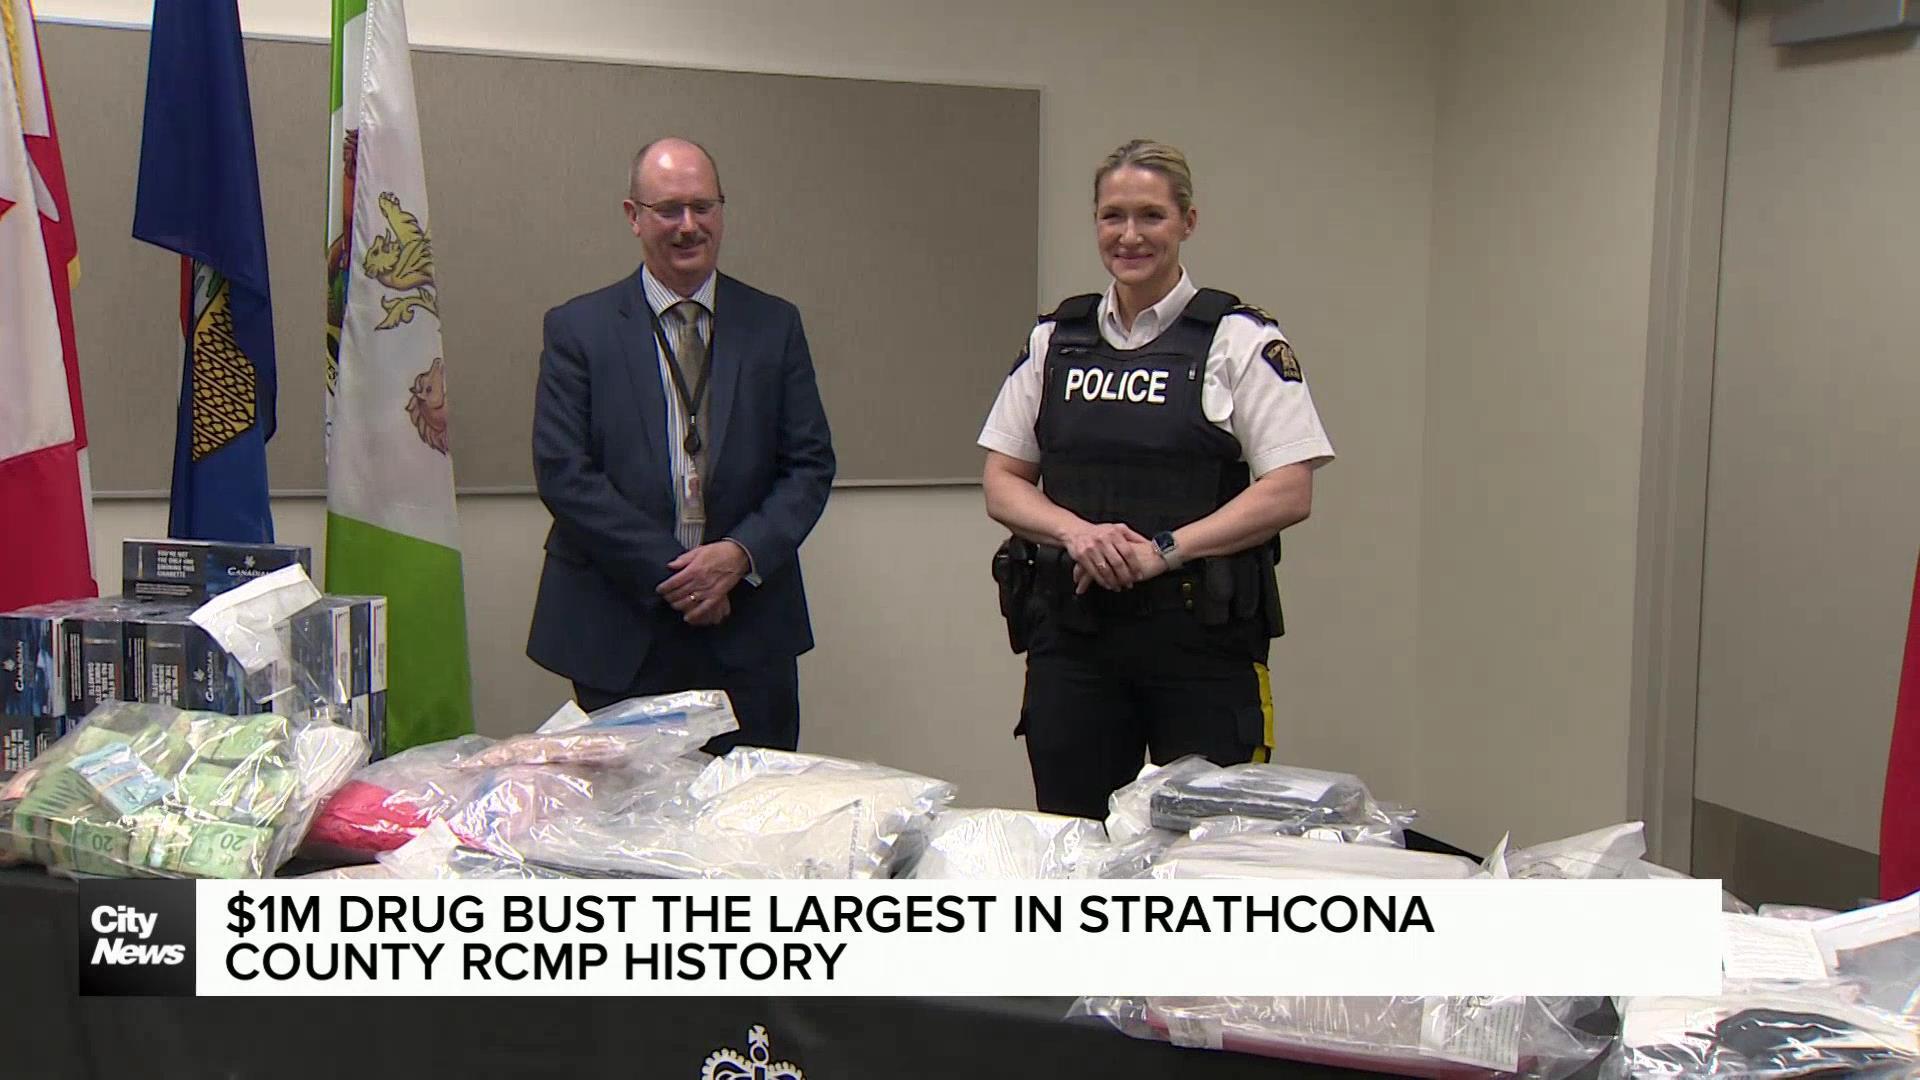 Largest drug bust in Strathcona County RCMP history